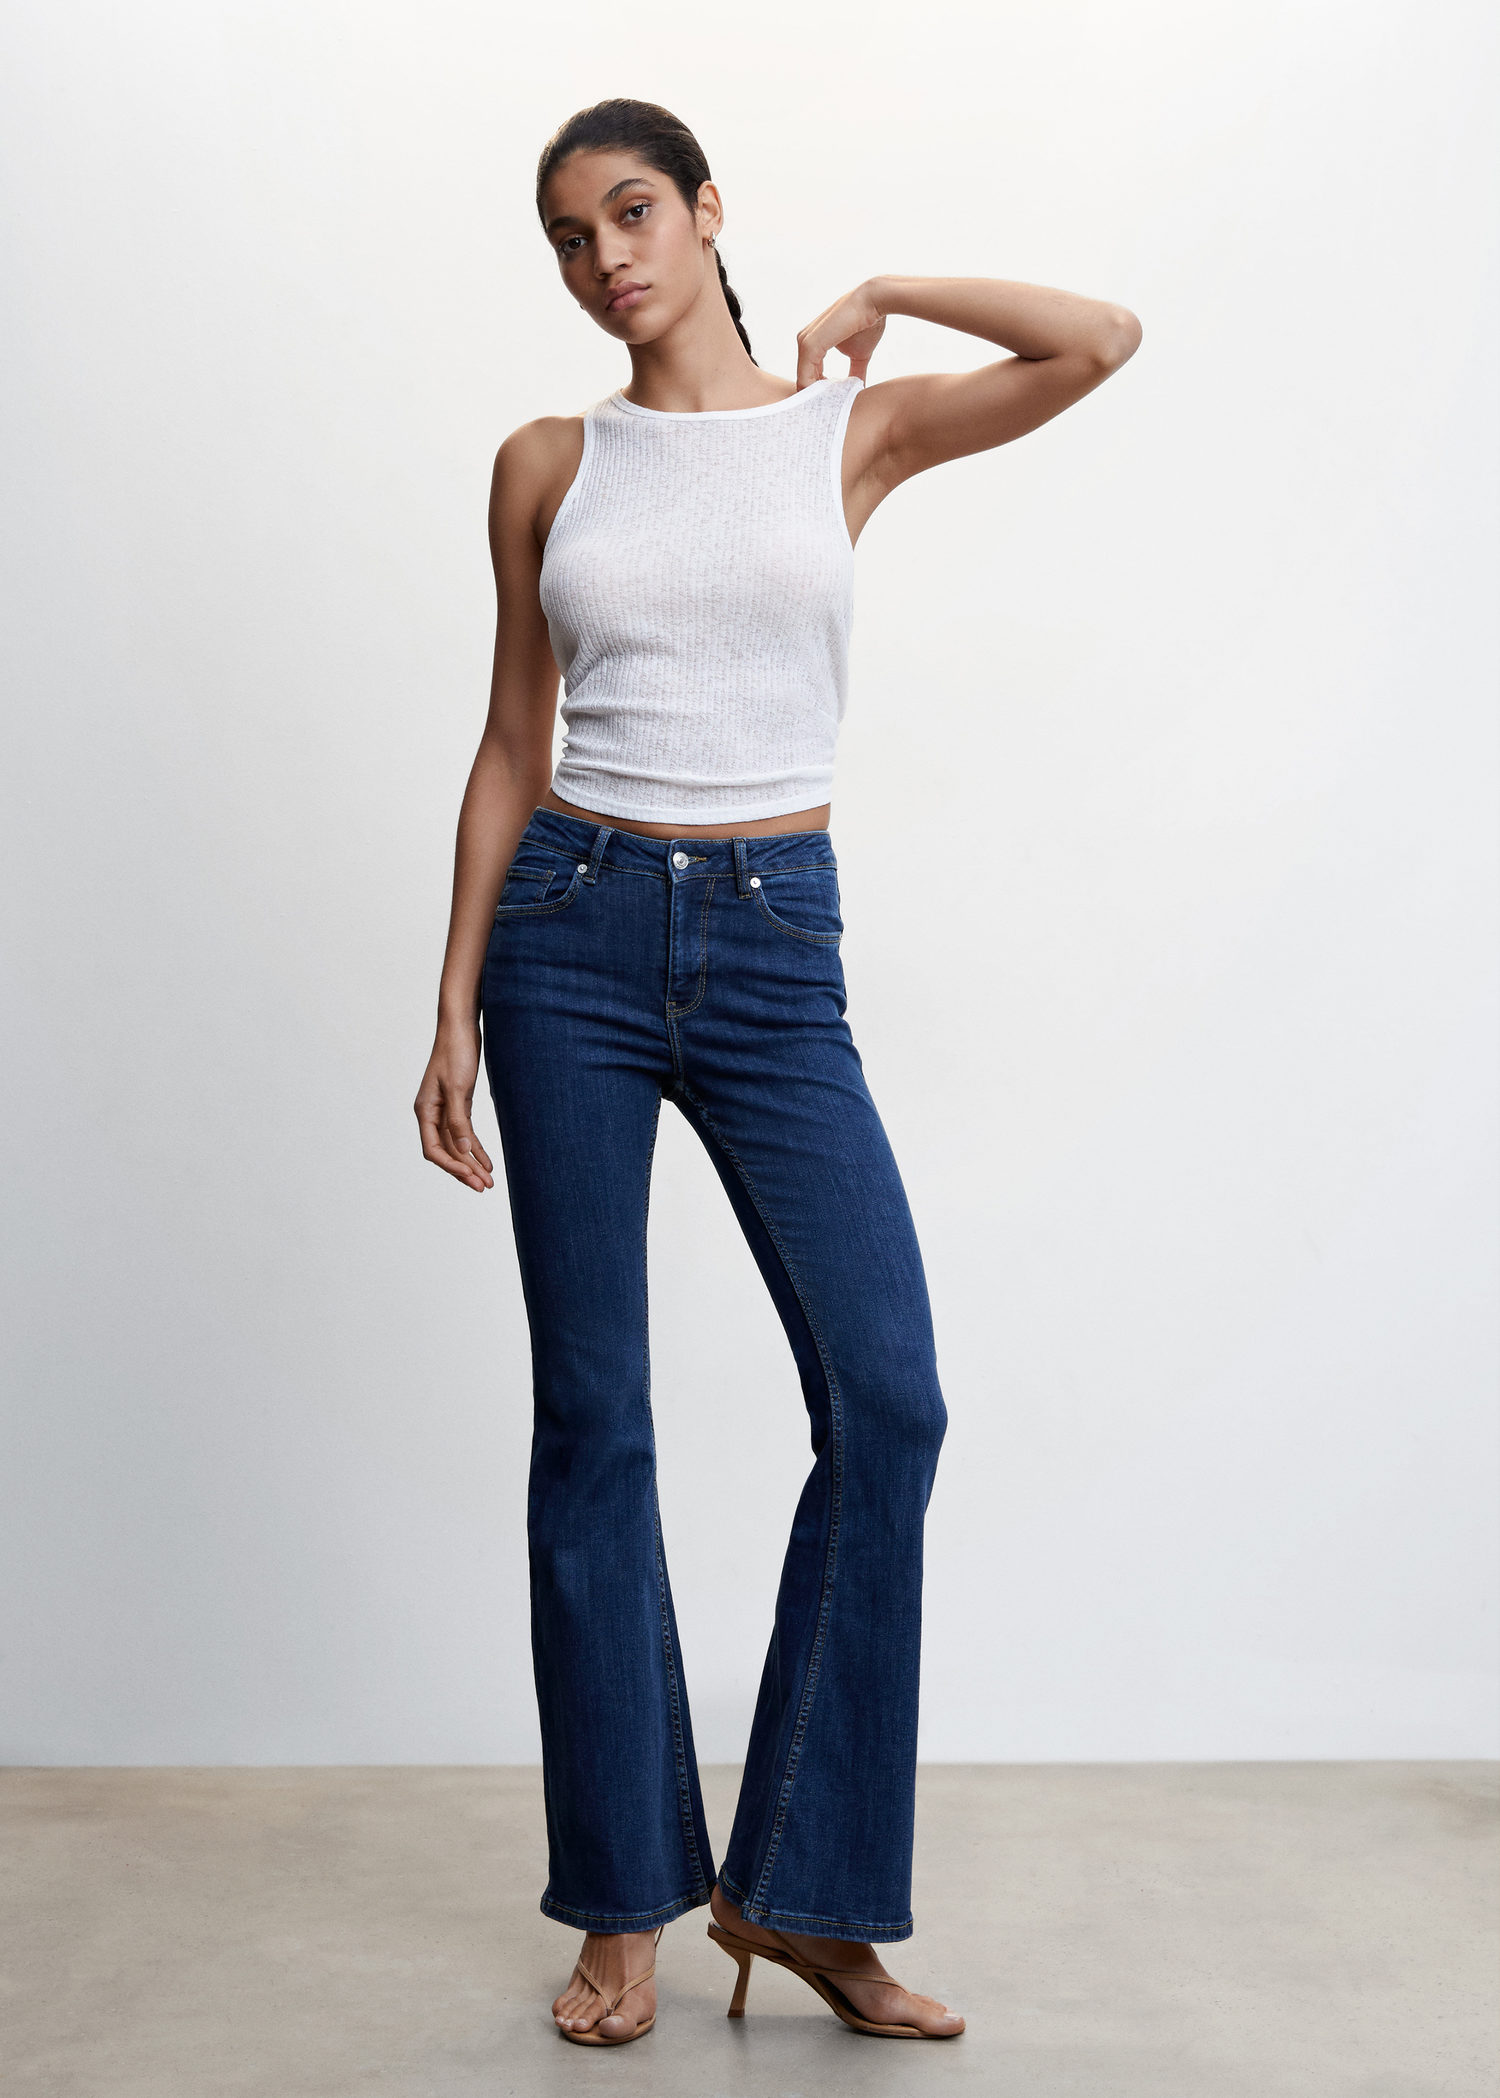 H&M+ Flare Low Jeans - Gris oscuro - MUJER